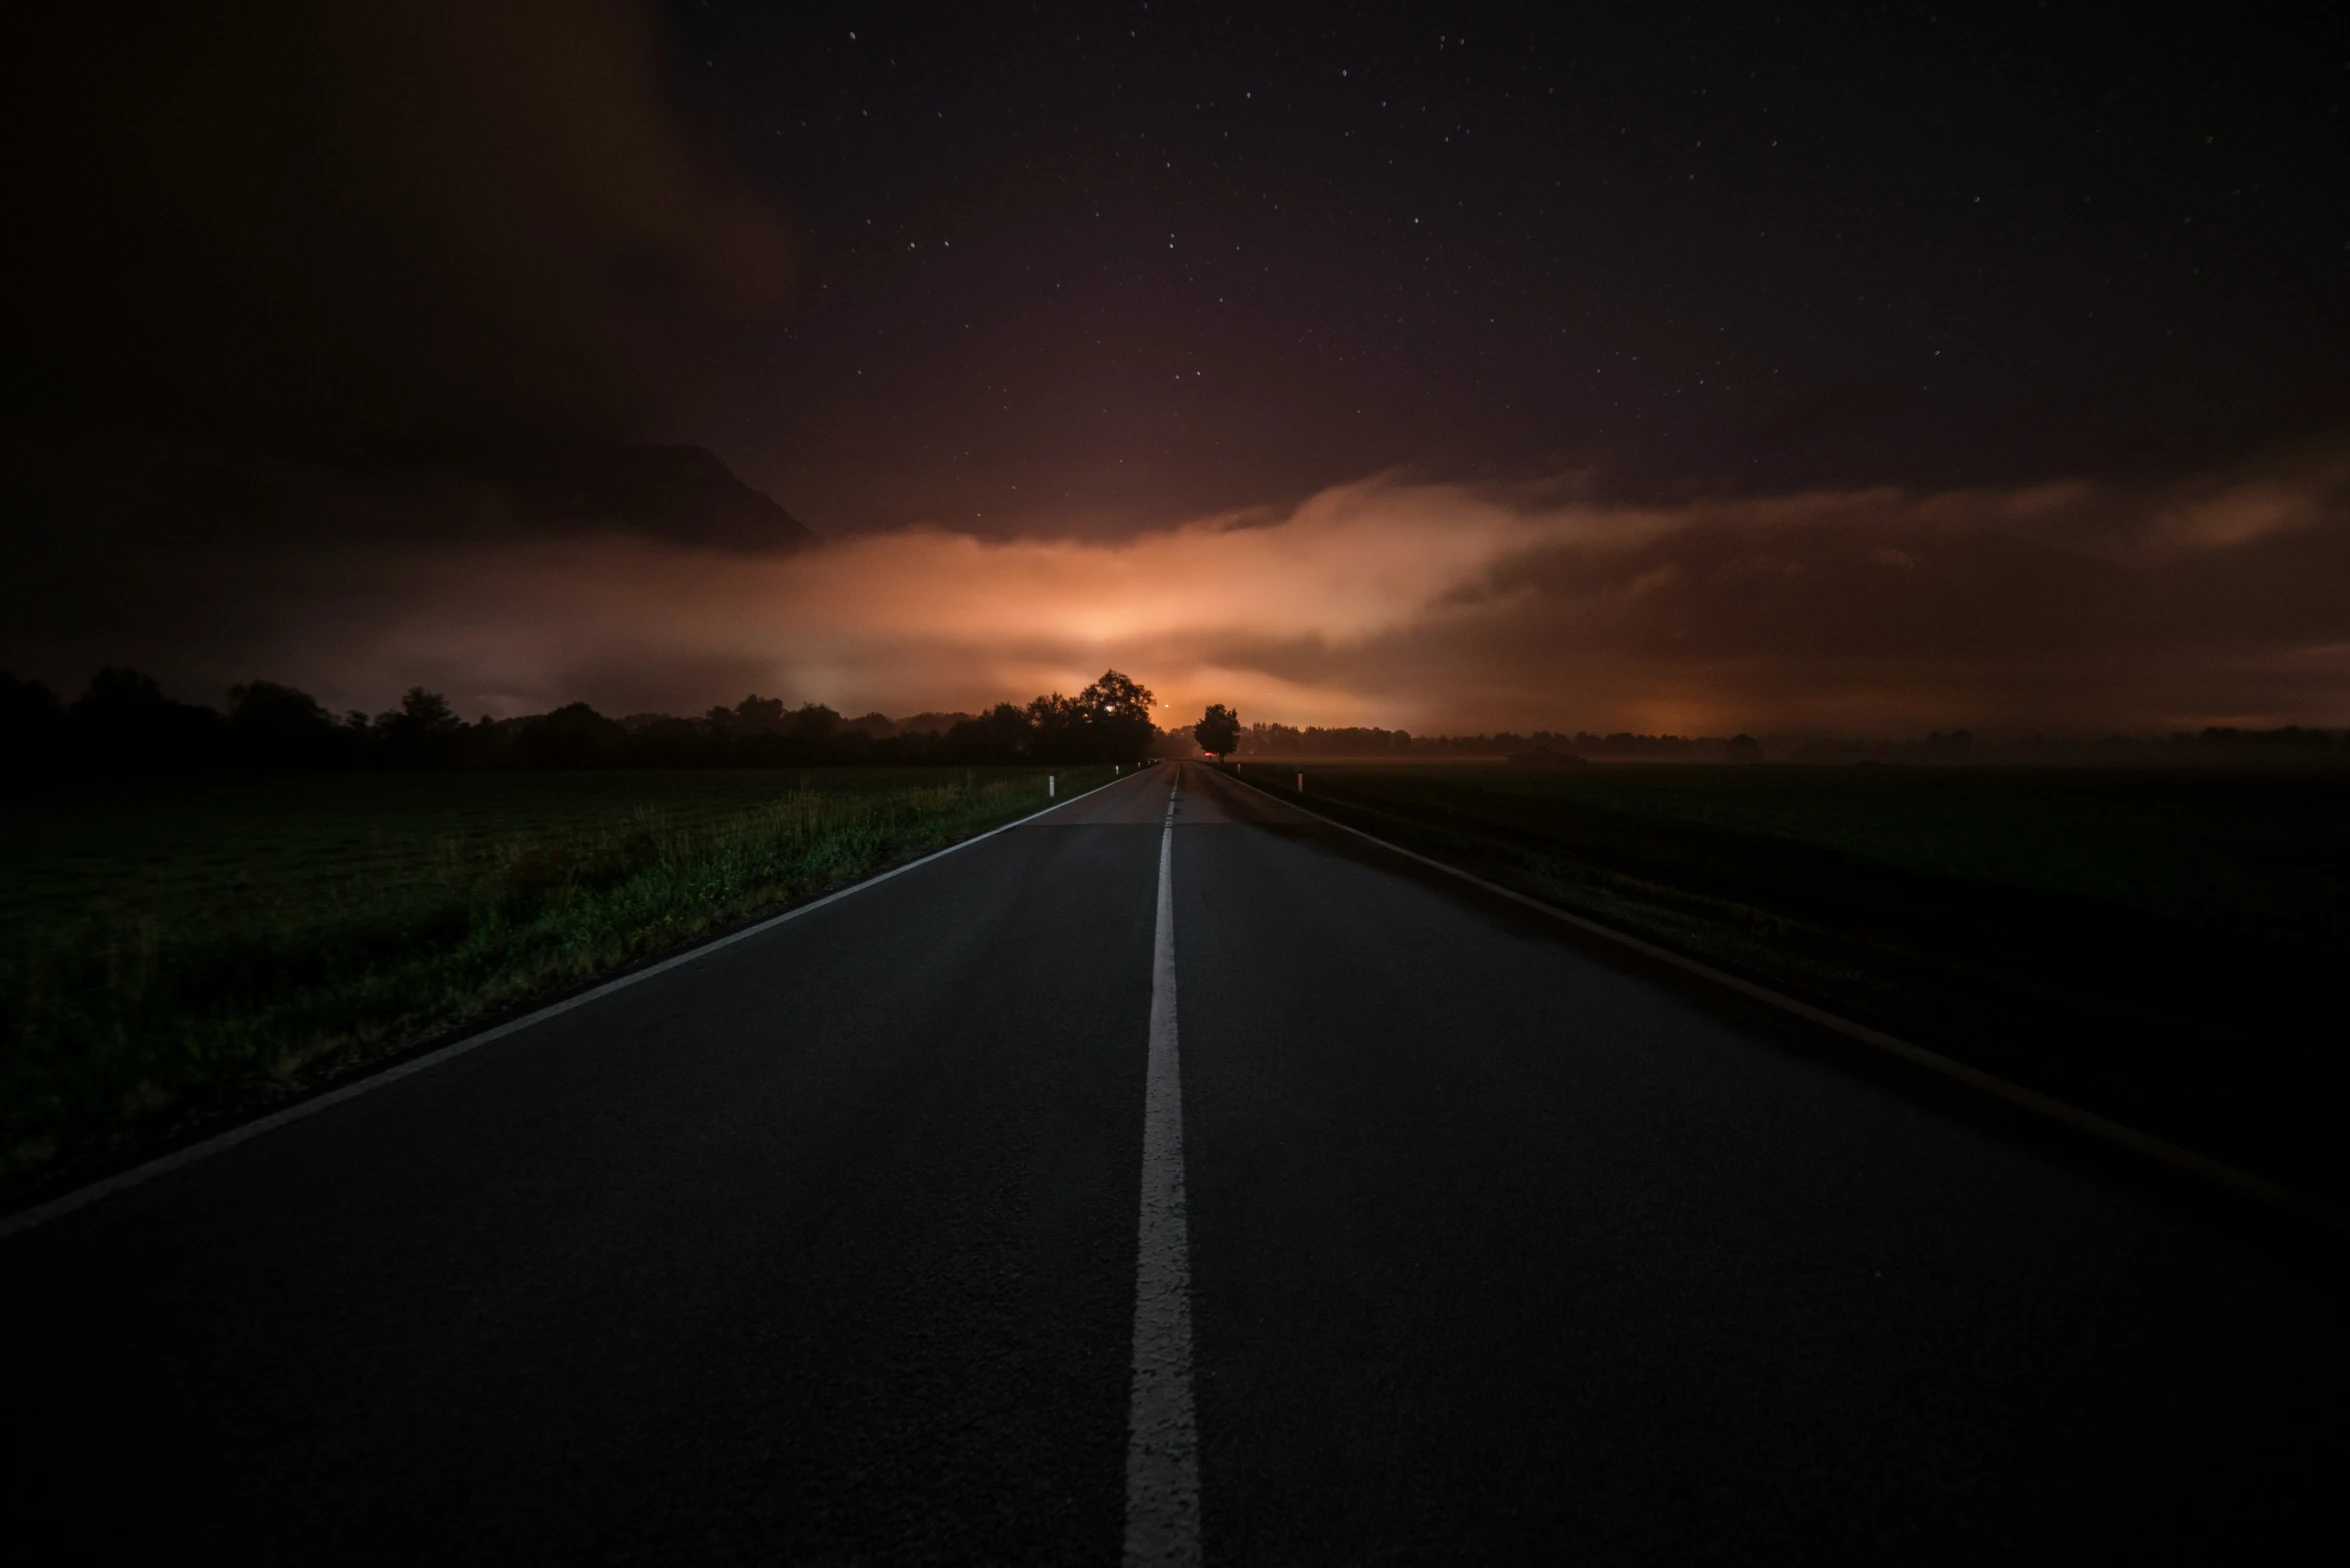 a dark and ominous sky is shown as the sun sets over an empty road